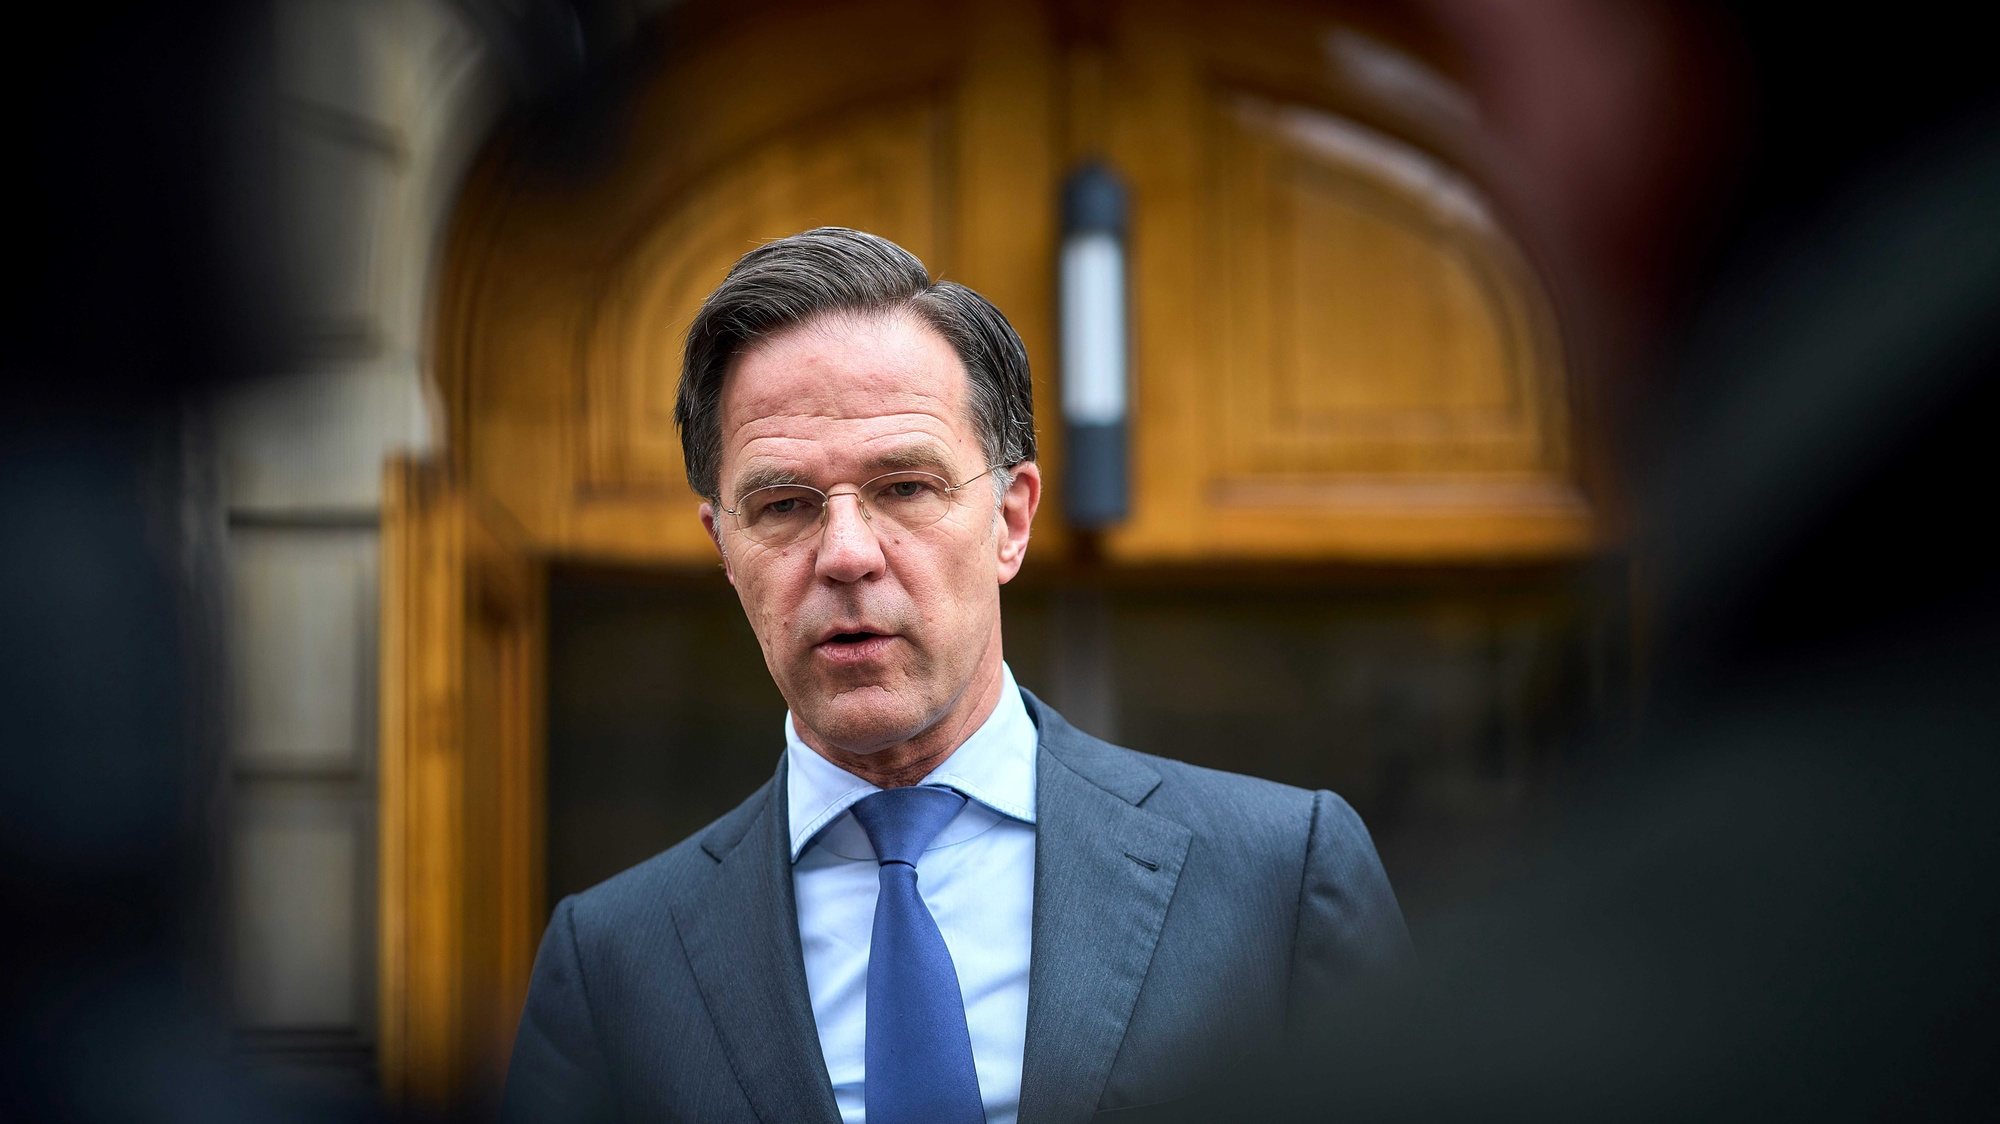 epa09776618 Dutch Prime Minister Mark Rutte addresses the press in The Hague, Netherlands, 22 February 2022. Russian President Vladimir Putin announced the recognition of the self-proclaimed Donetsk People&#039;s Republic (DPR) and the Luhansk People&#039;s Republic (LPR).  EPA/Phil nijhuis